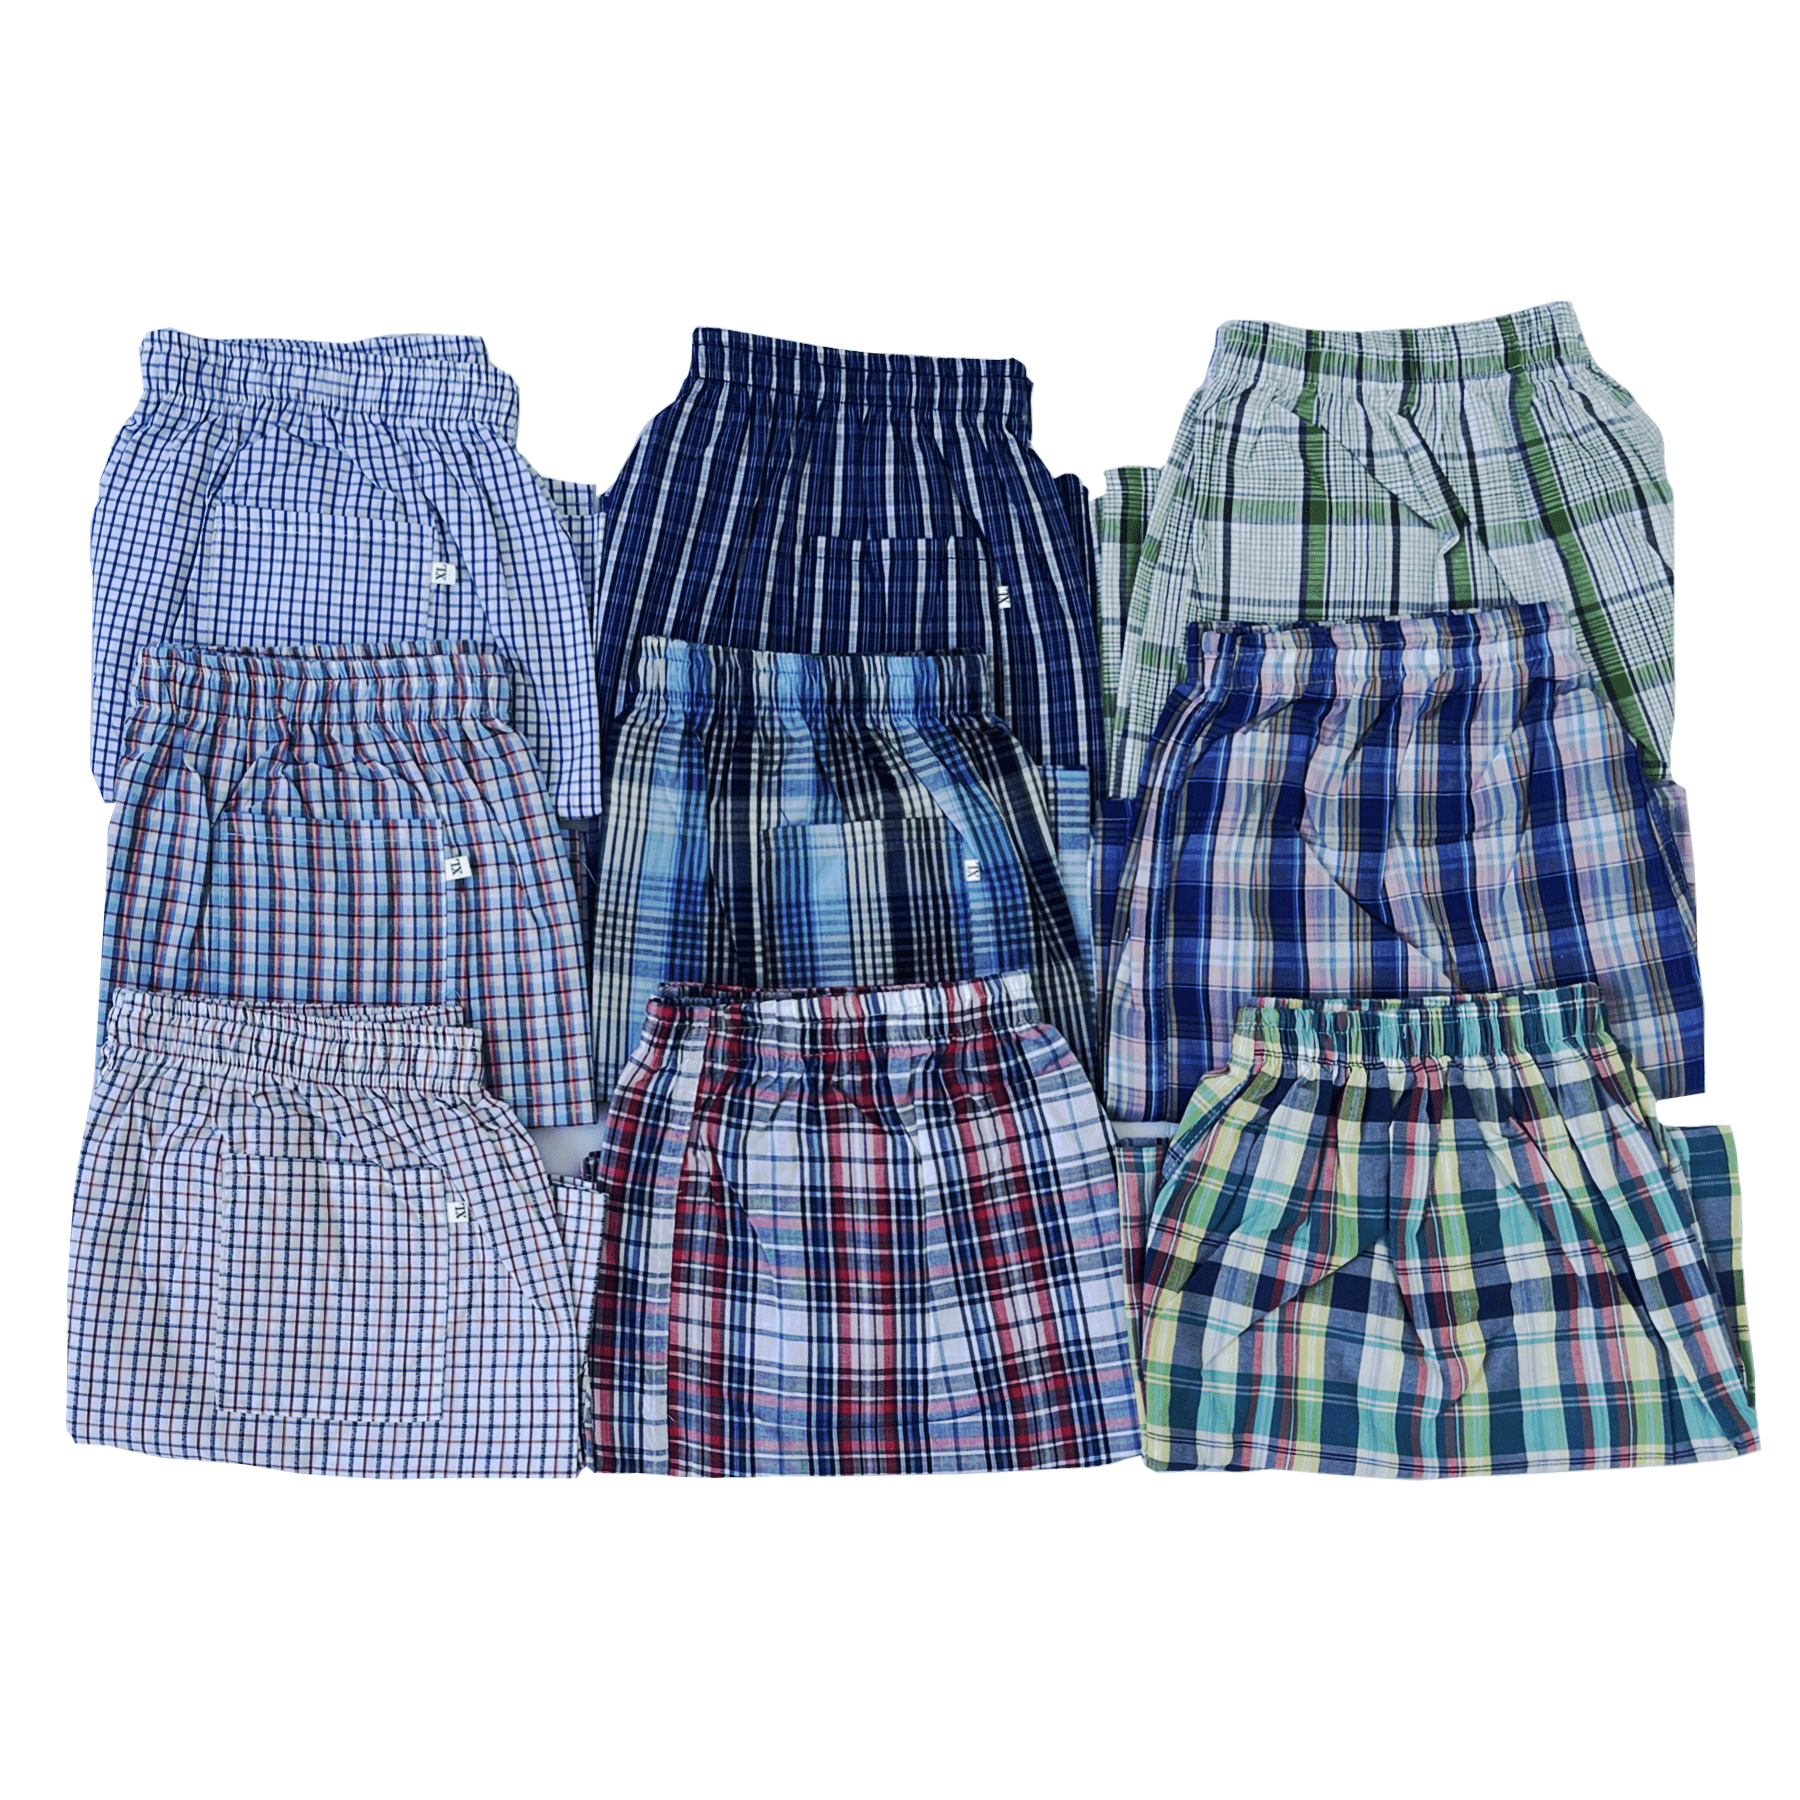 Man Short Pants Fast Delivery Quick Dry Cheap Price Oem Each One In Opp Bag Made In Vietnam Manufacturer 1